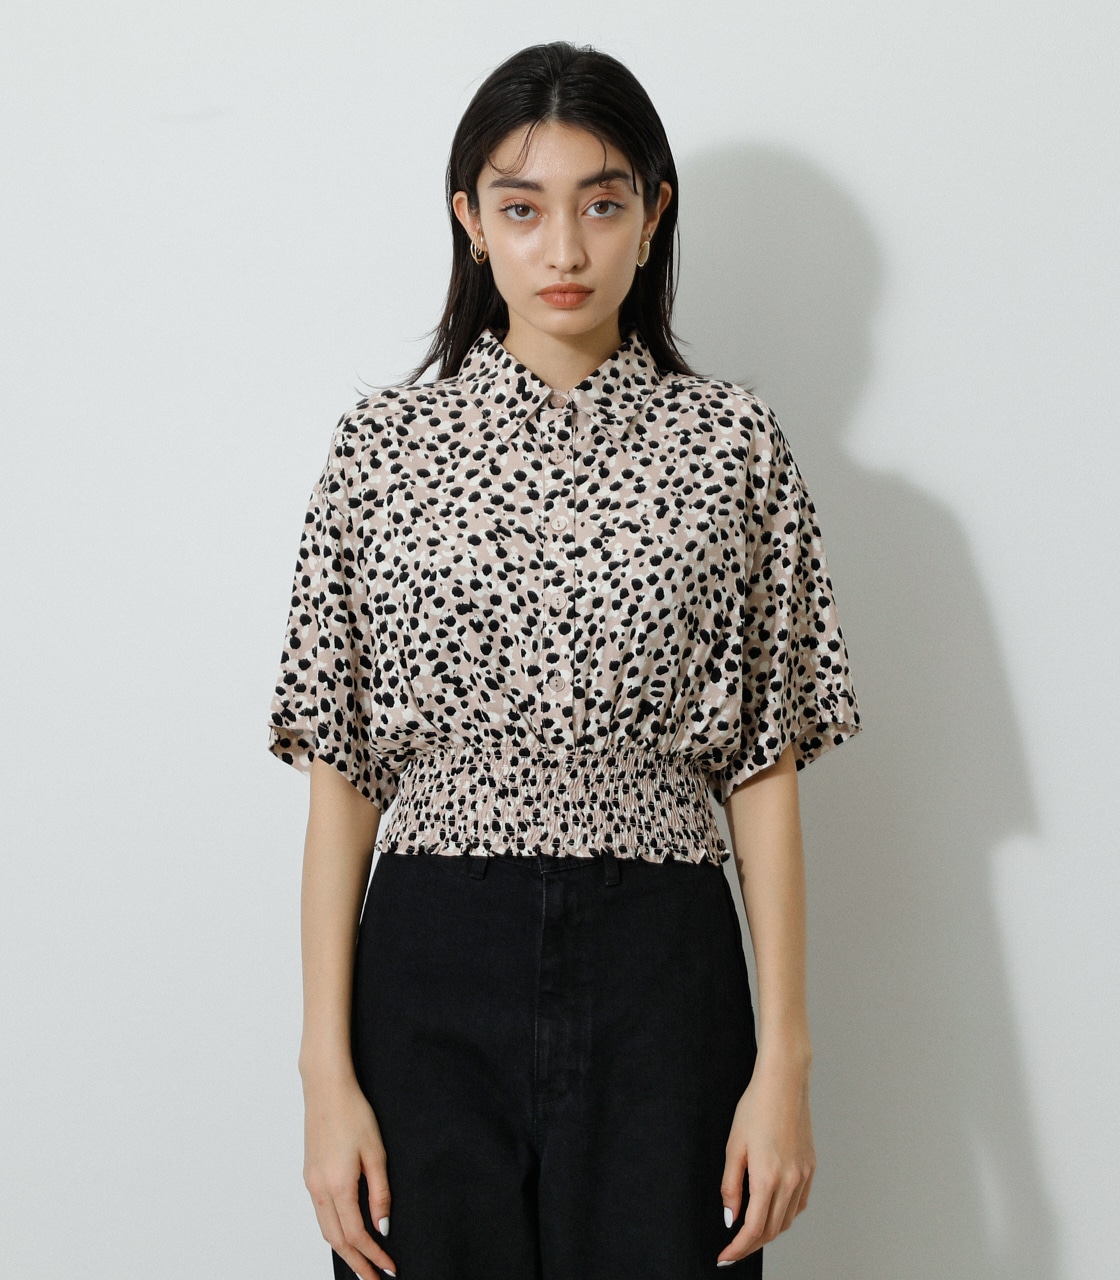 ECOVERO LEOPARD PRINT BLOUSE/エコヴェロレオパードプリントブラウス 詳細画像 柄BEG 5